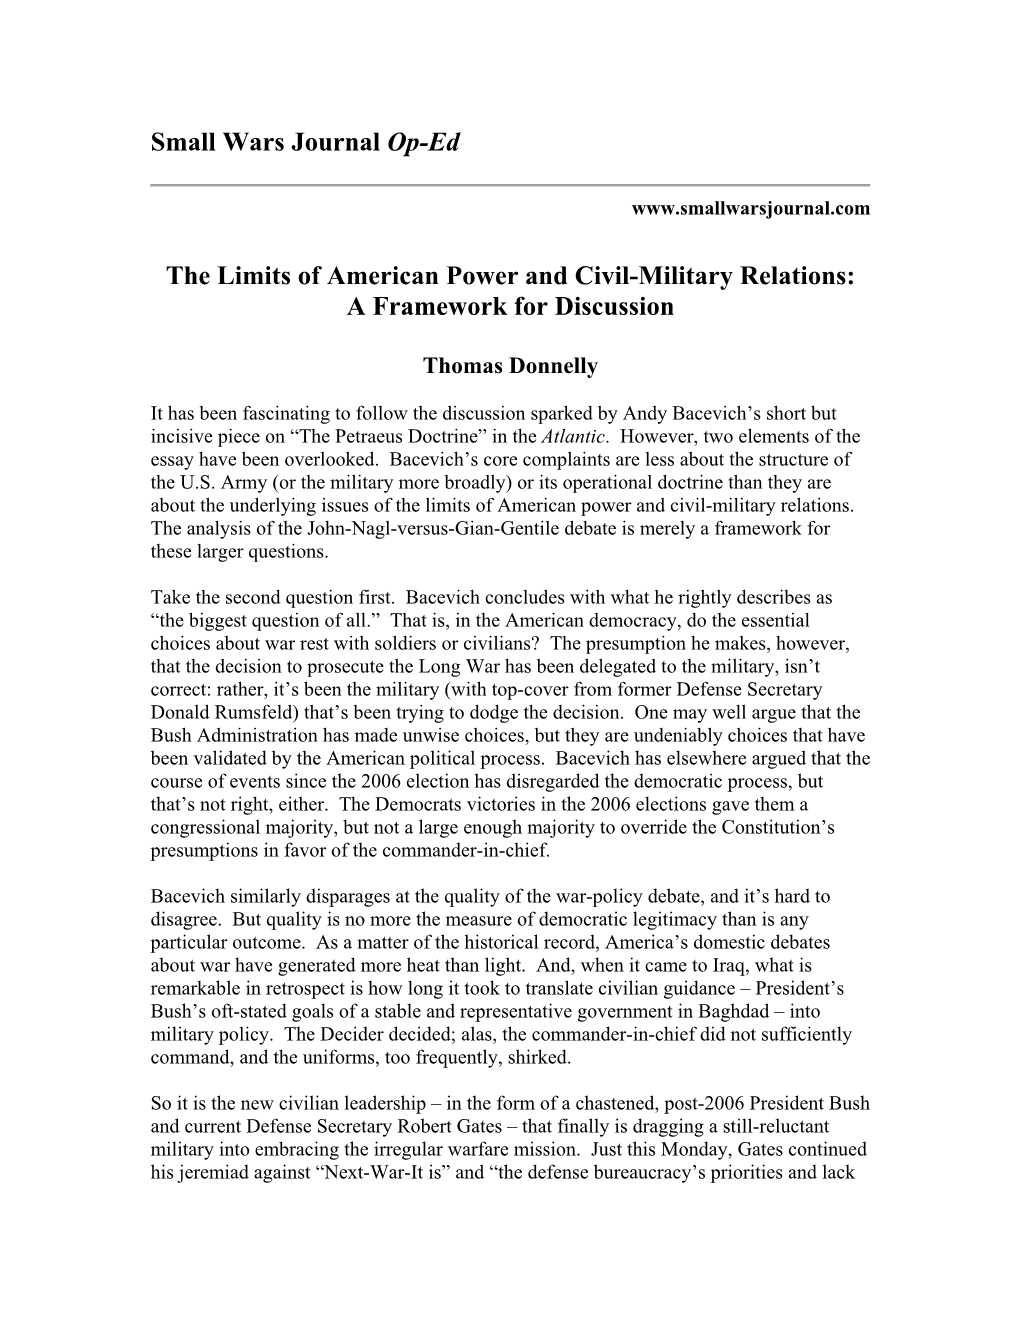 Small Wars Journal Op-Ed the Limits of American Power and Civil